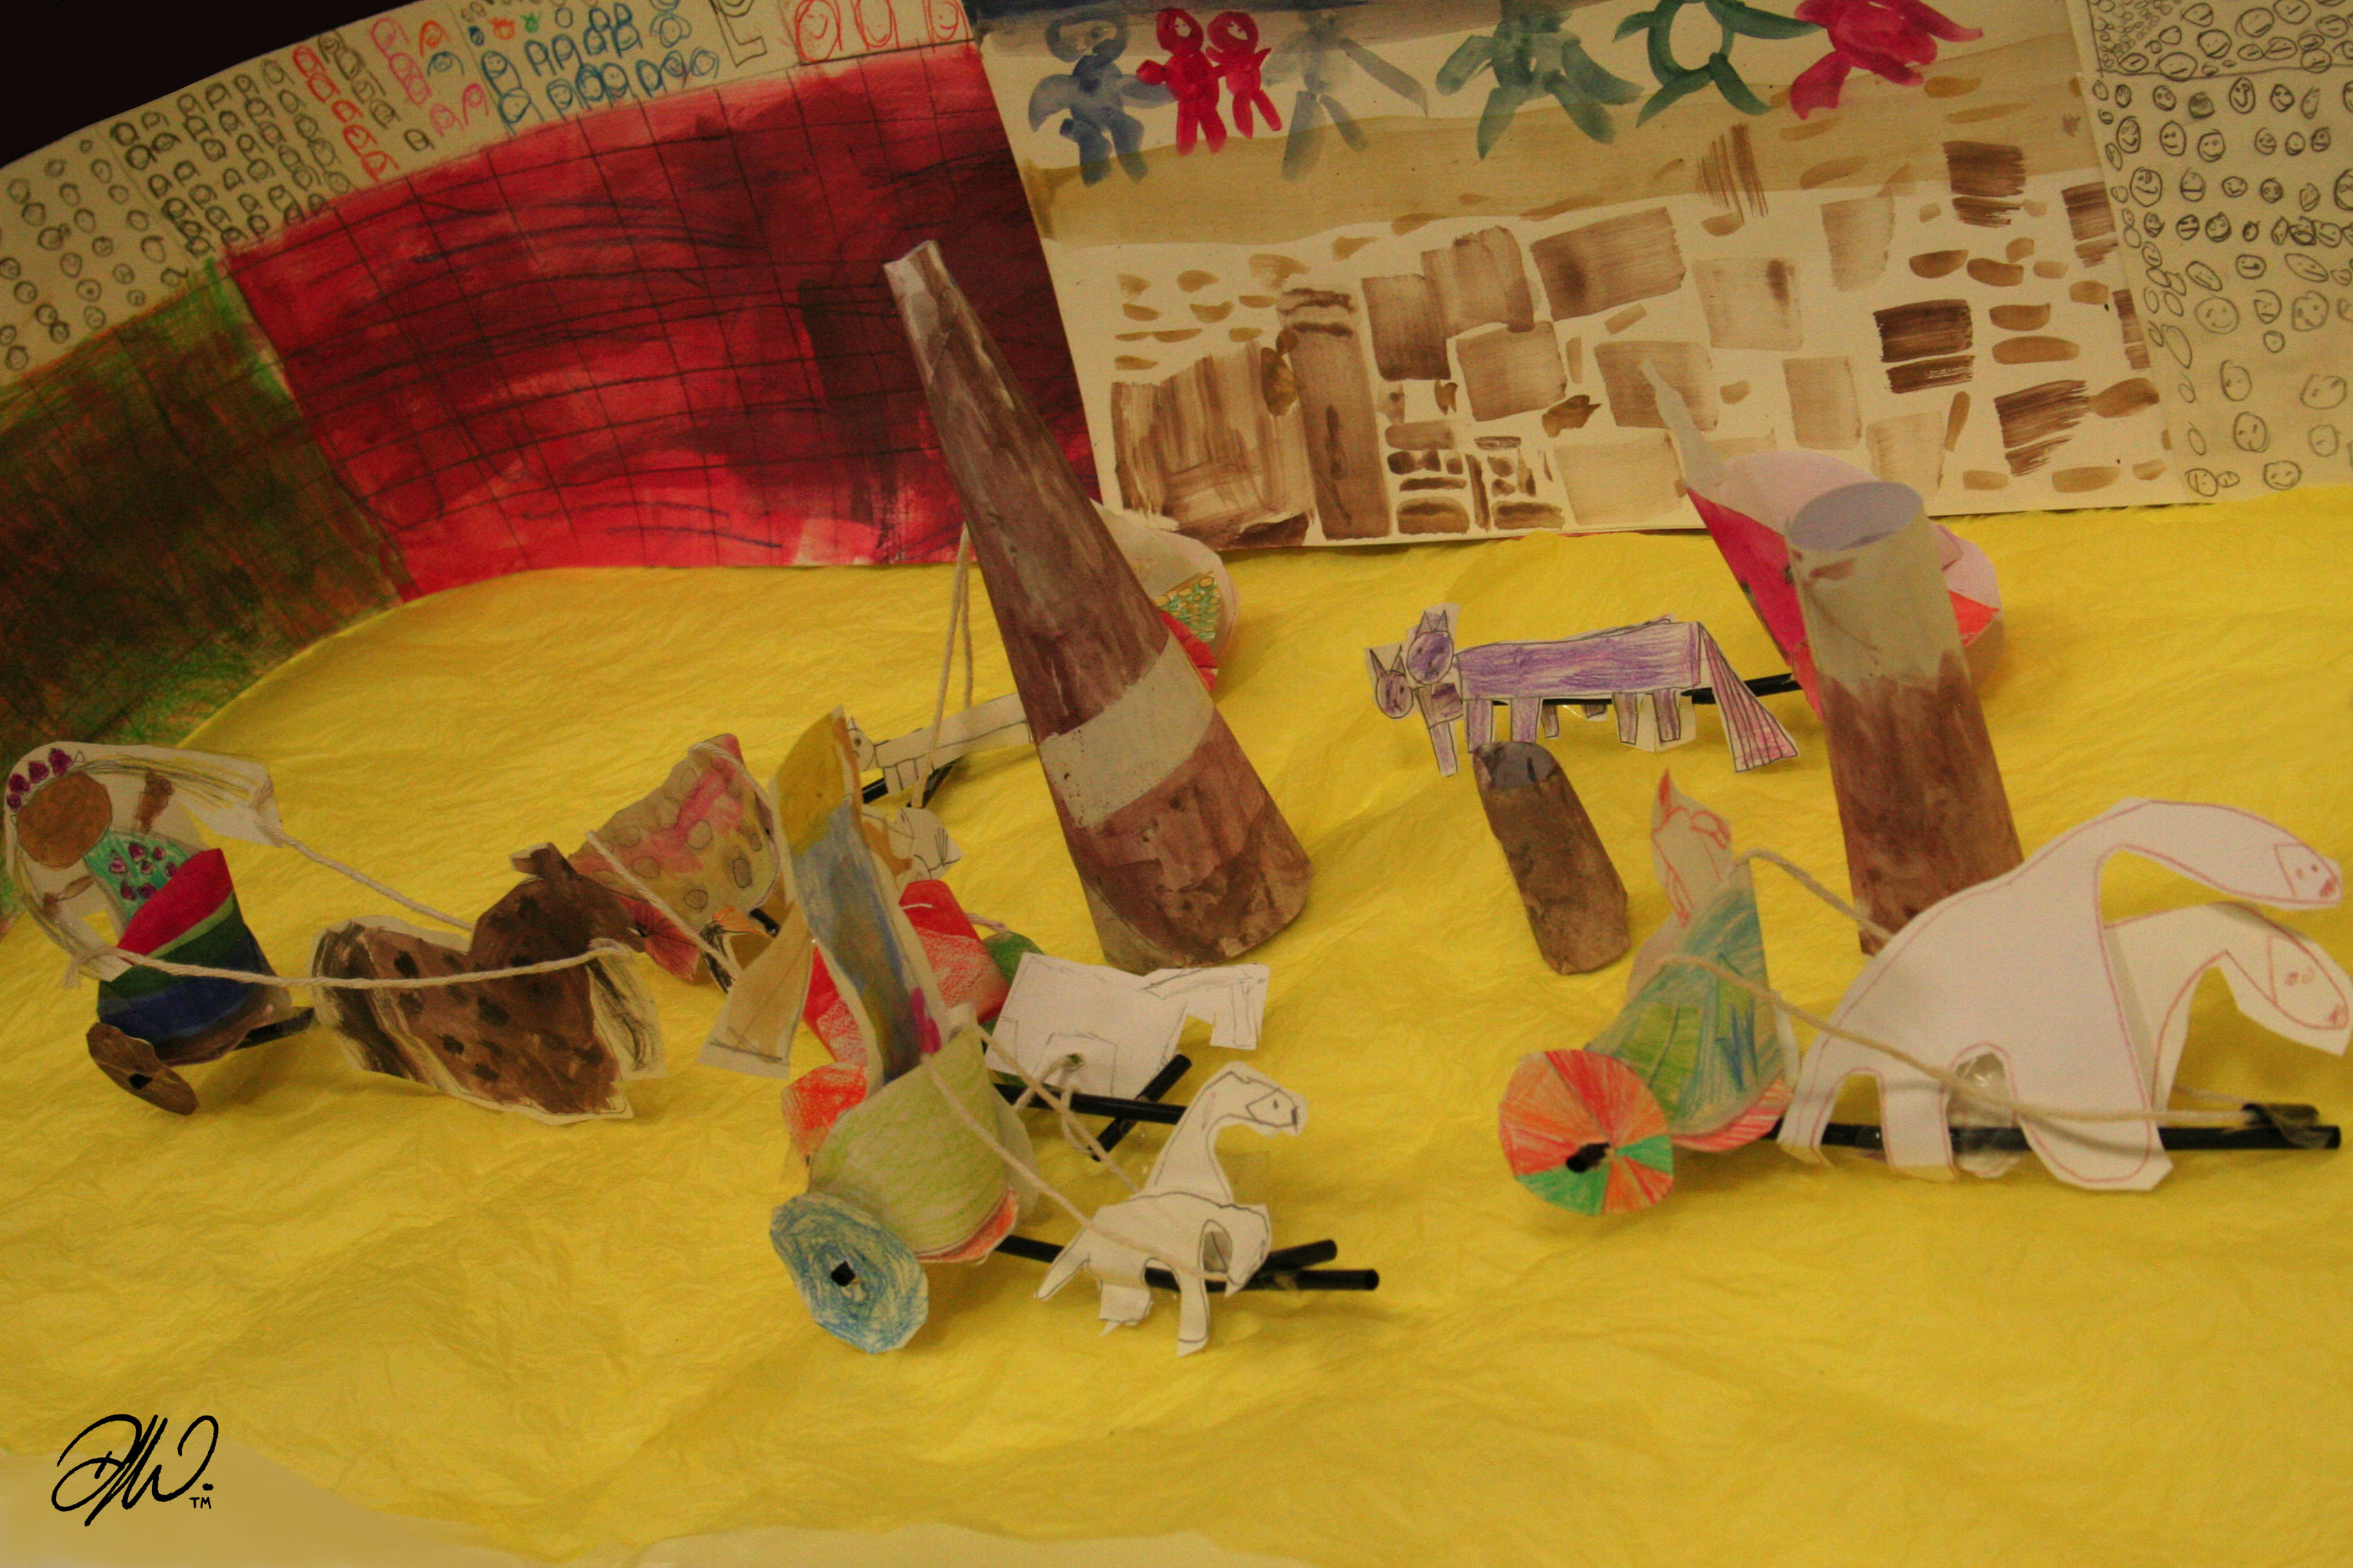 <b>Whinstone Primary School Year 3</b> - Circus Maximus Arena with Illustrated Chariot Models - 2 of 7